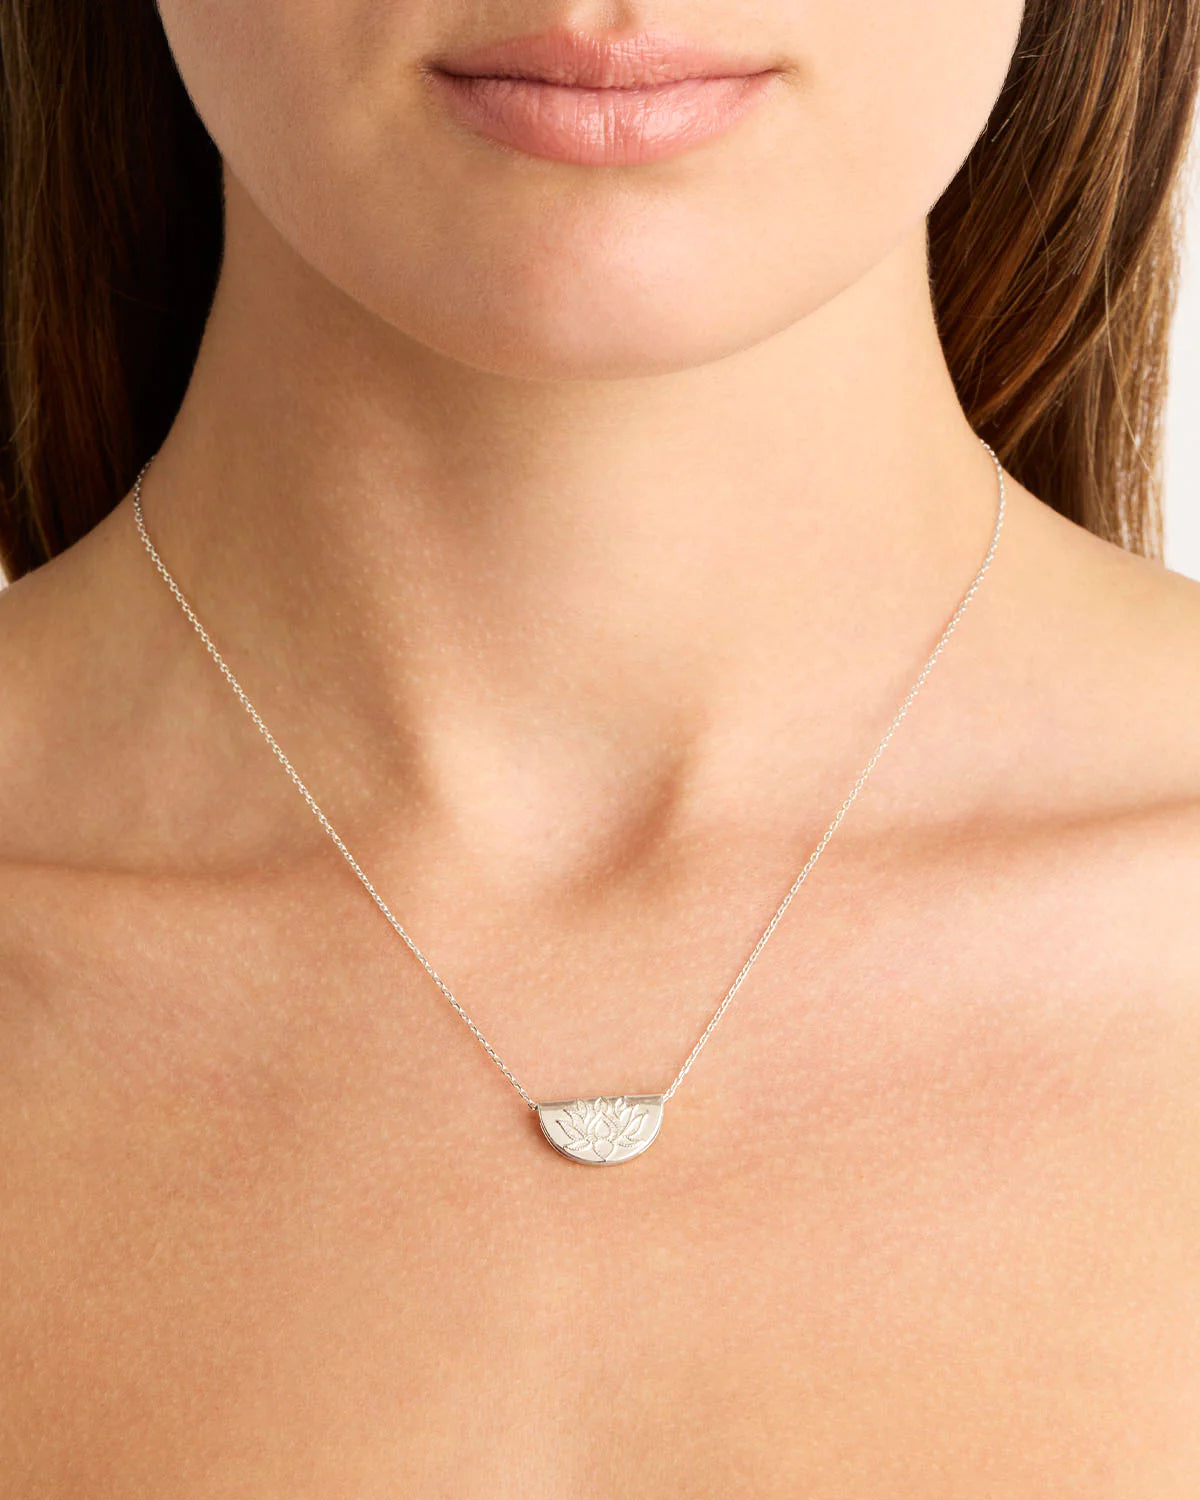 LOTUS SHORT NECKLACE - STERLING SILVER